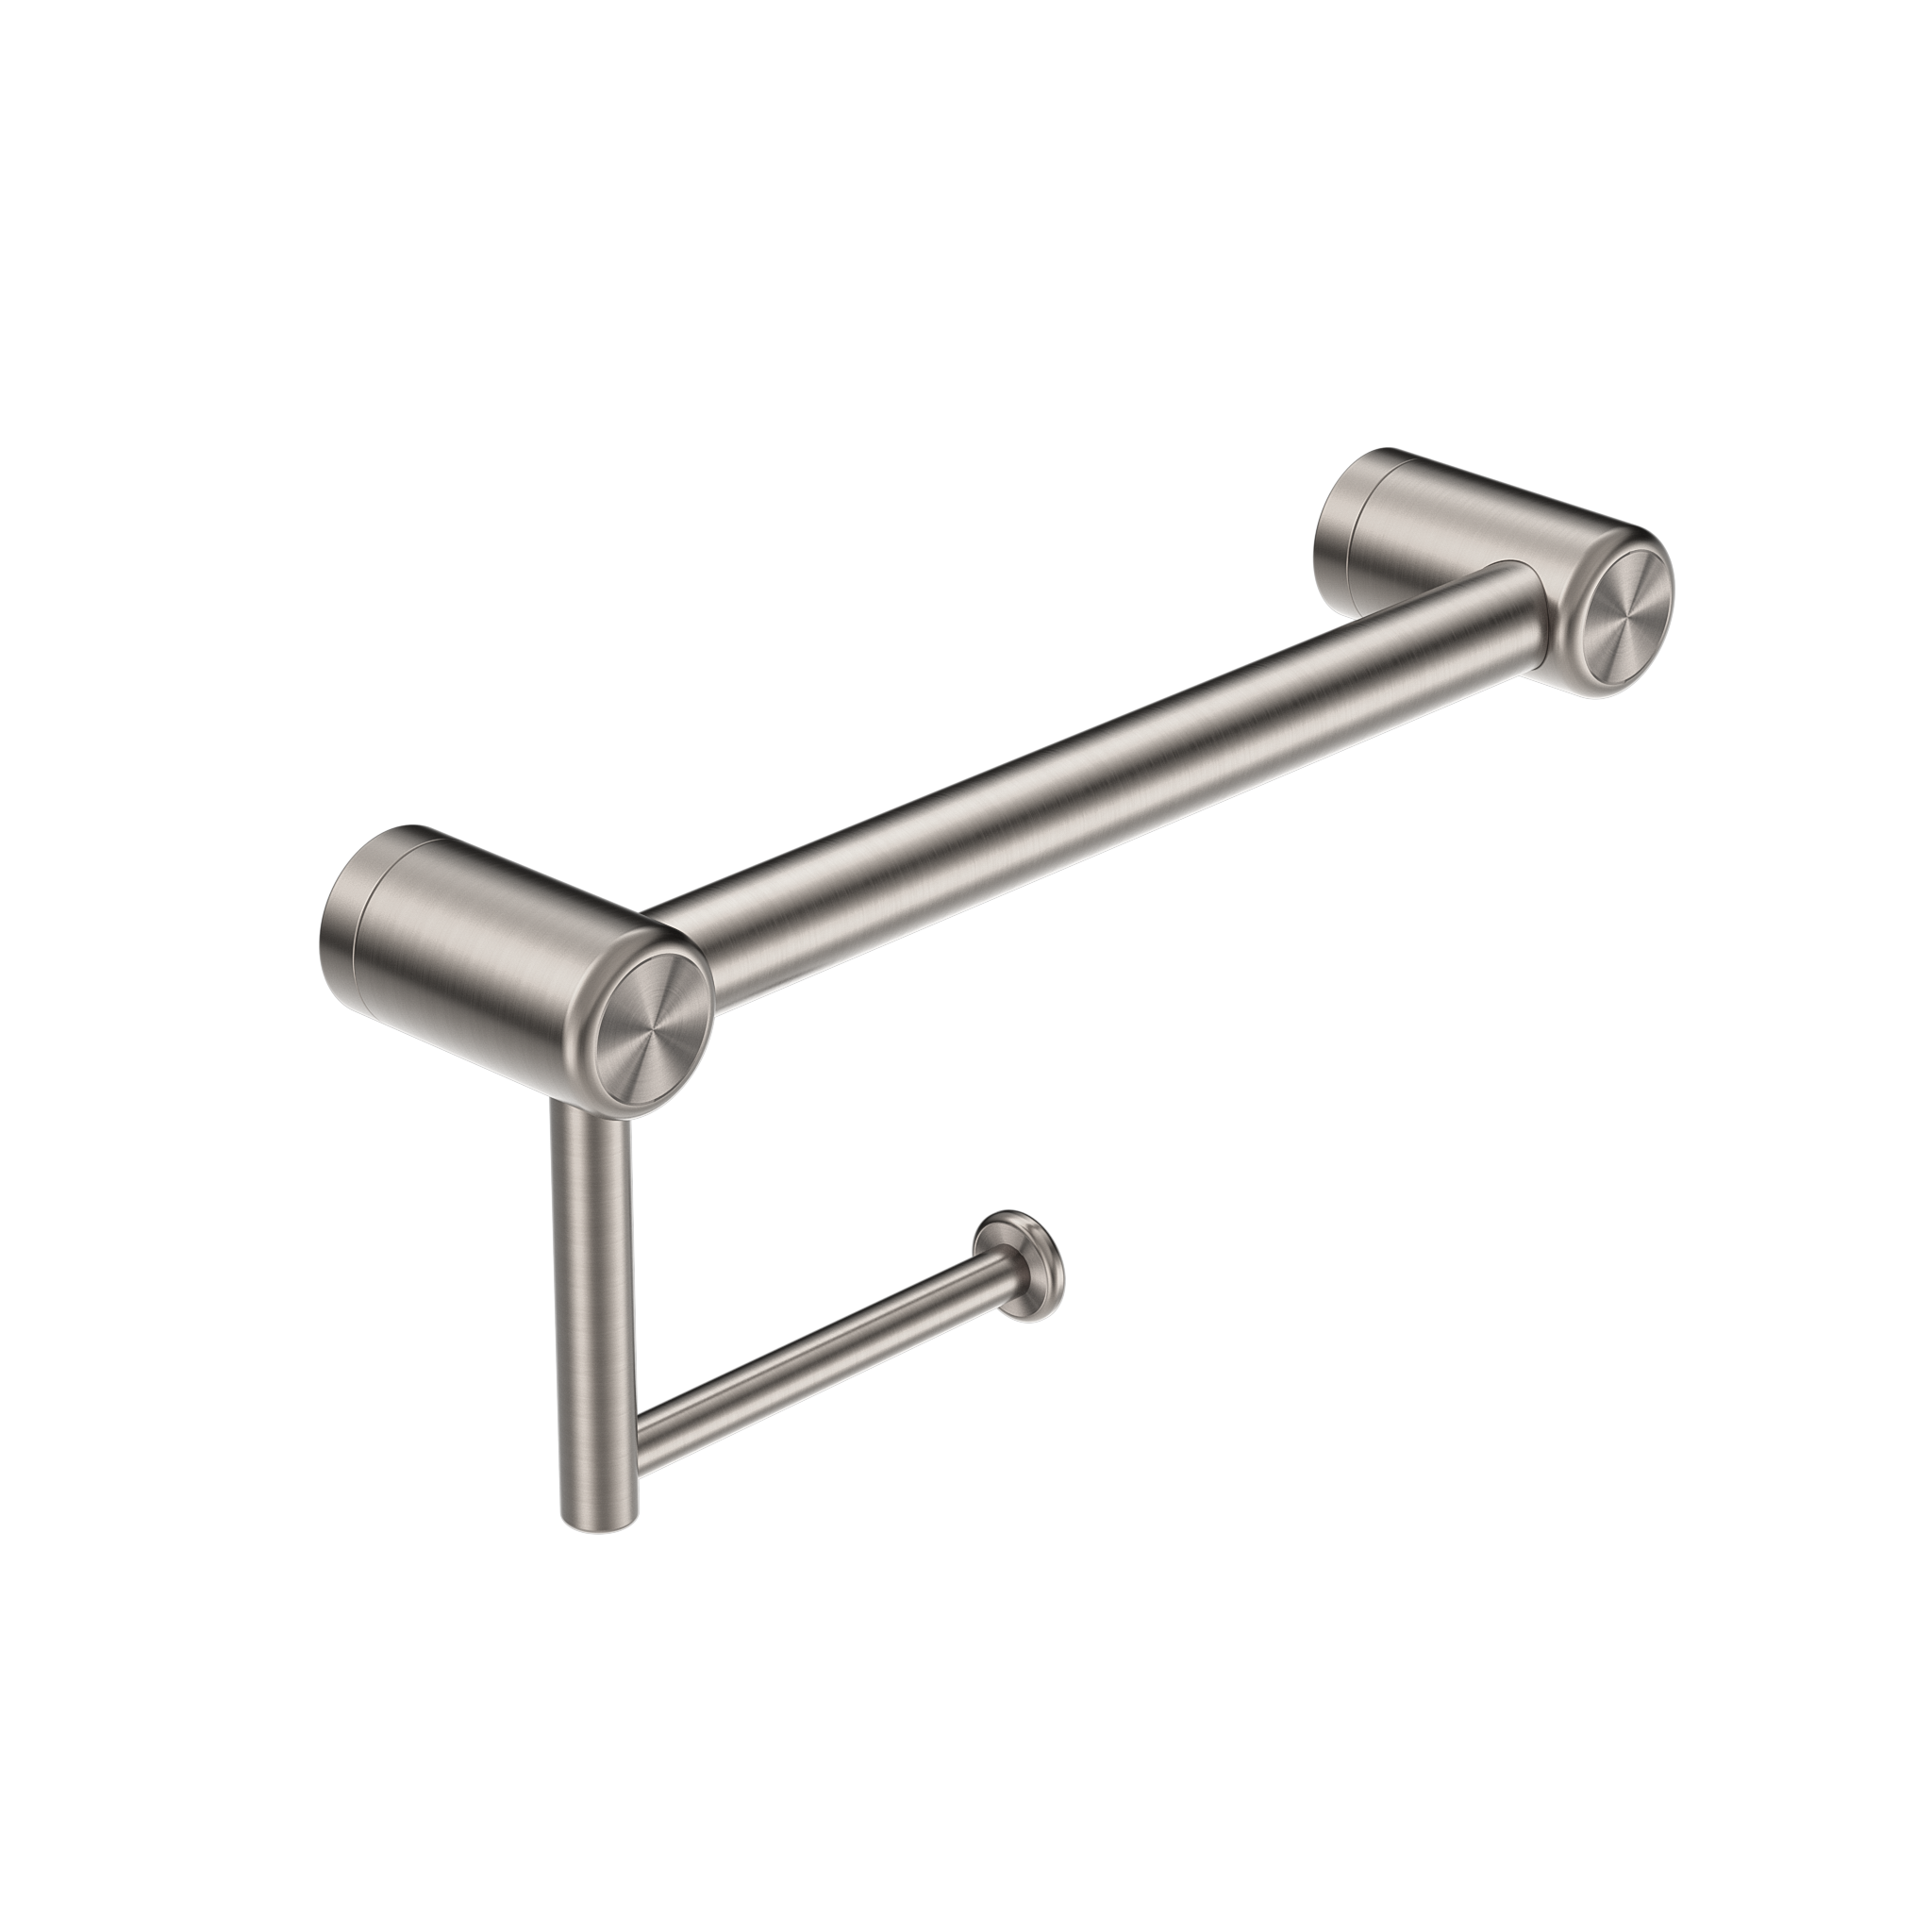 CALIBRE MECCA 25MM TOILET ROLL RAIL 300MM BRUSHED NICKEL